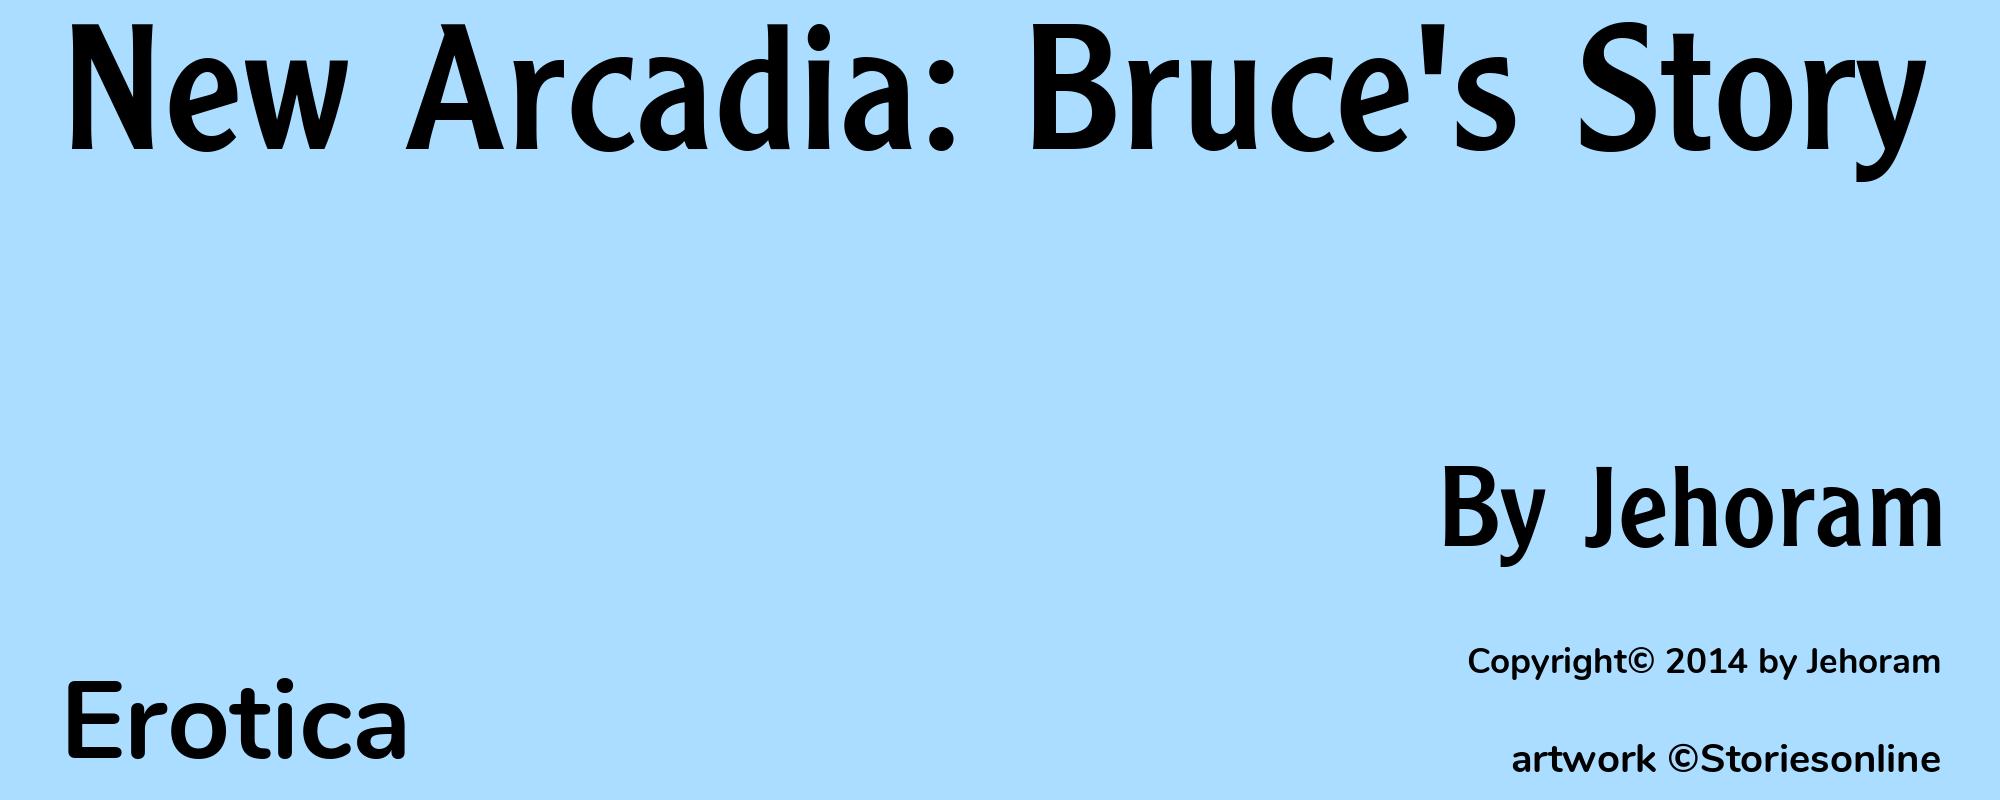 New Arcadia: Bruce's Story - Cover